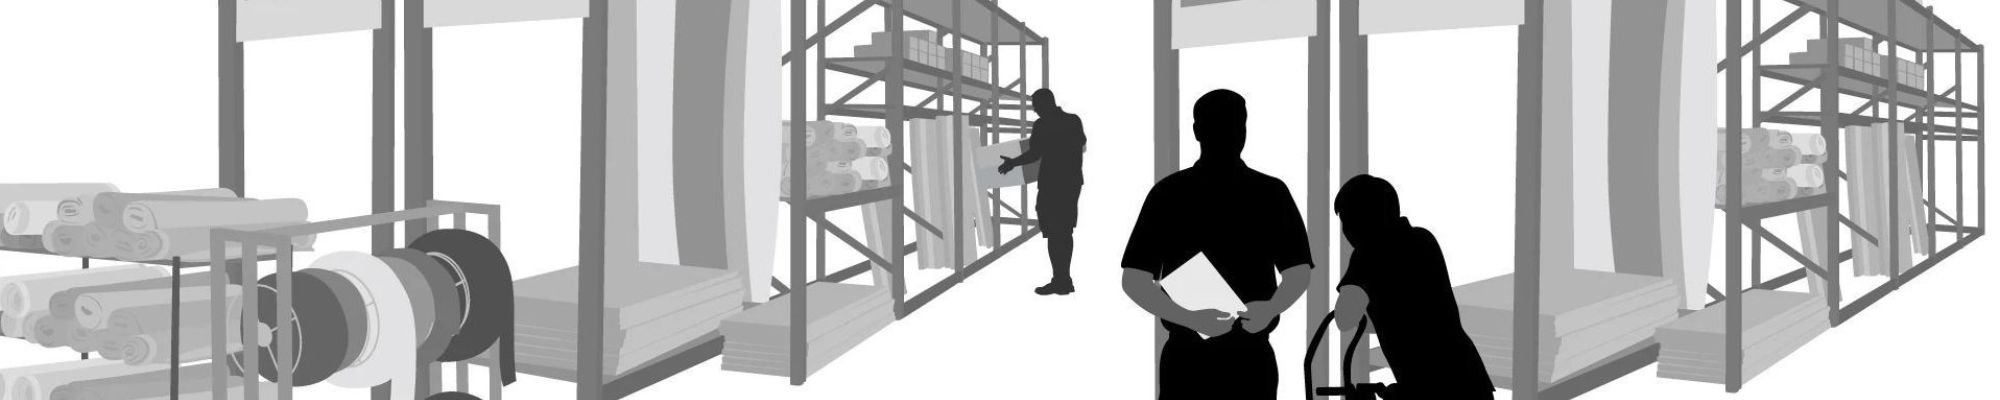 Line art of employees working in a warehouse - Solano Carpet in CA